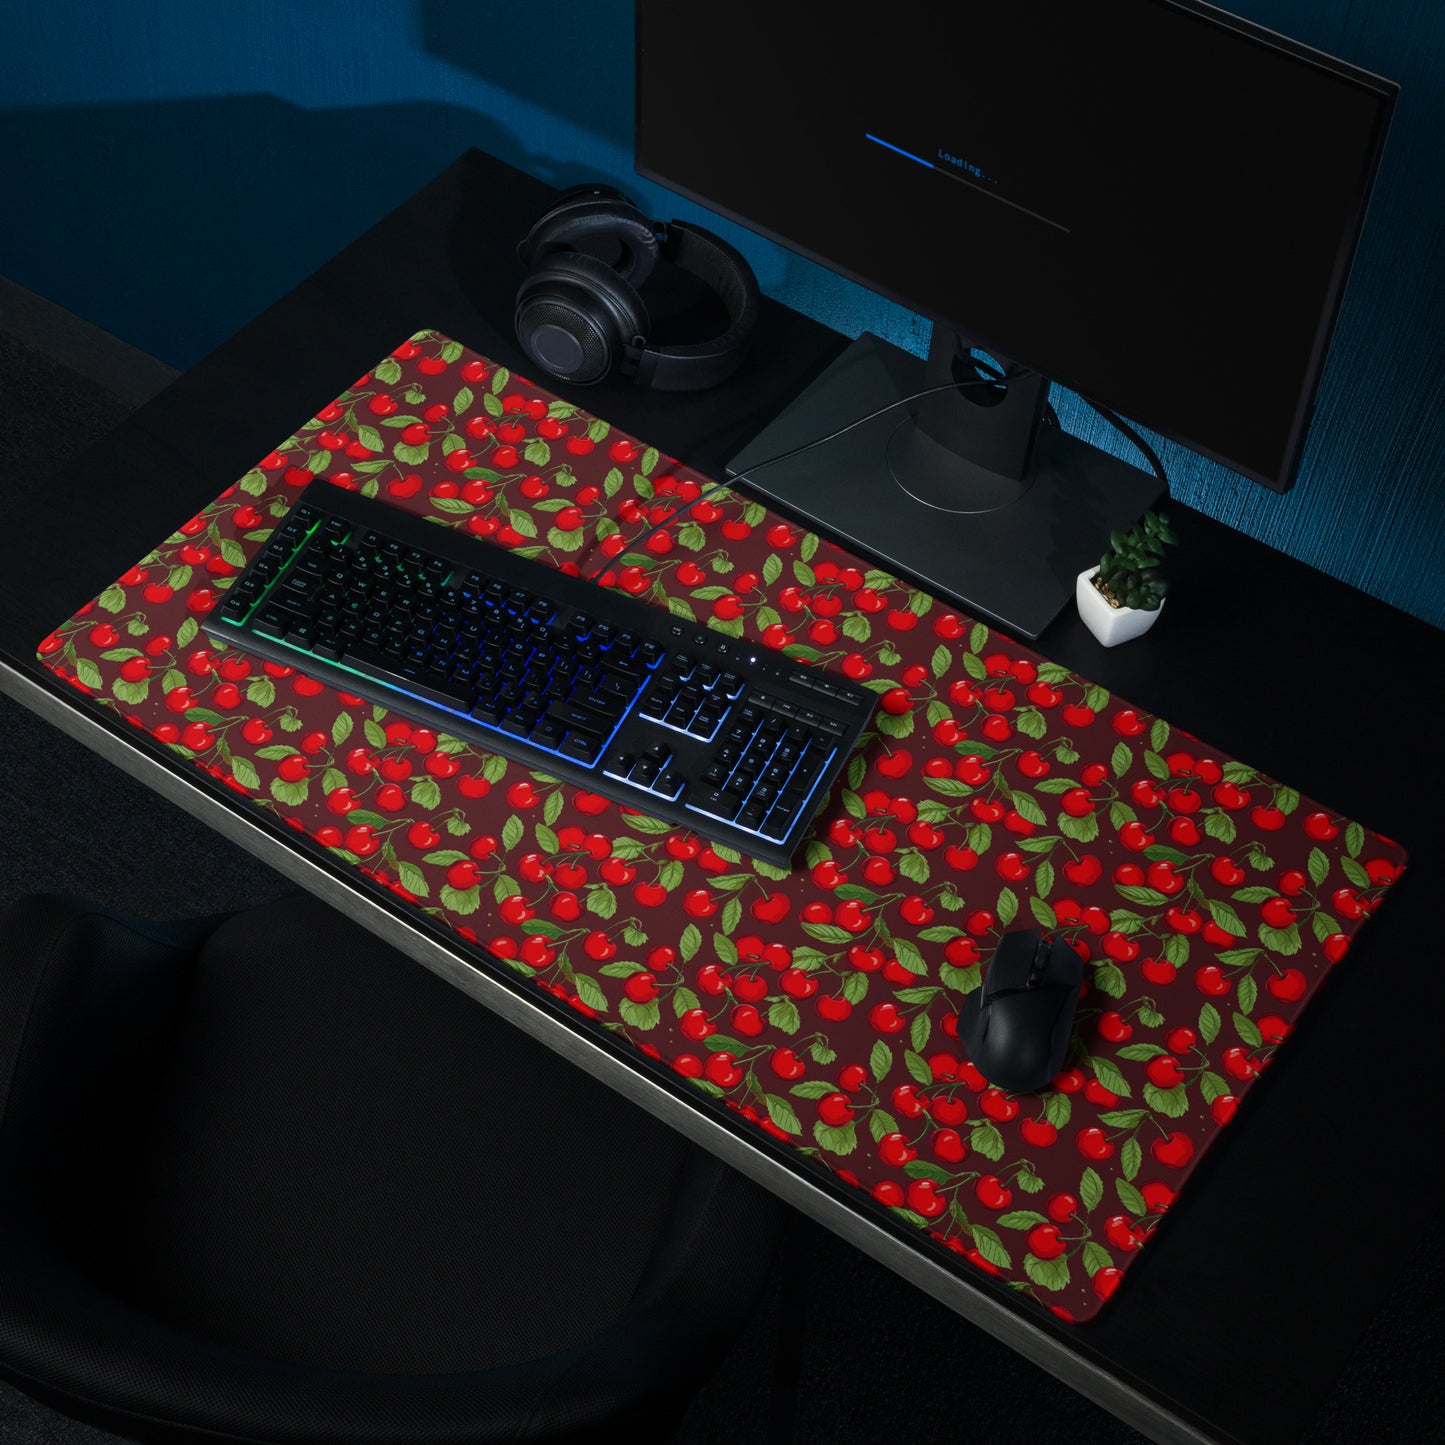 A 36" x 18" desk pad with cherries all over it shown at a desk. Red in color.